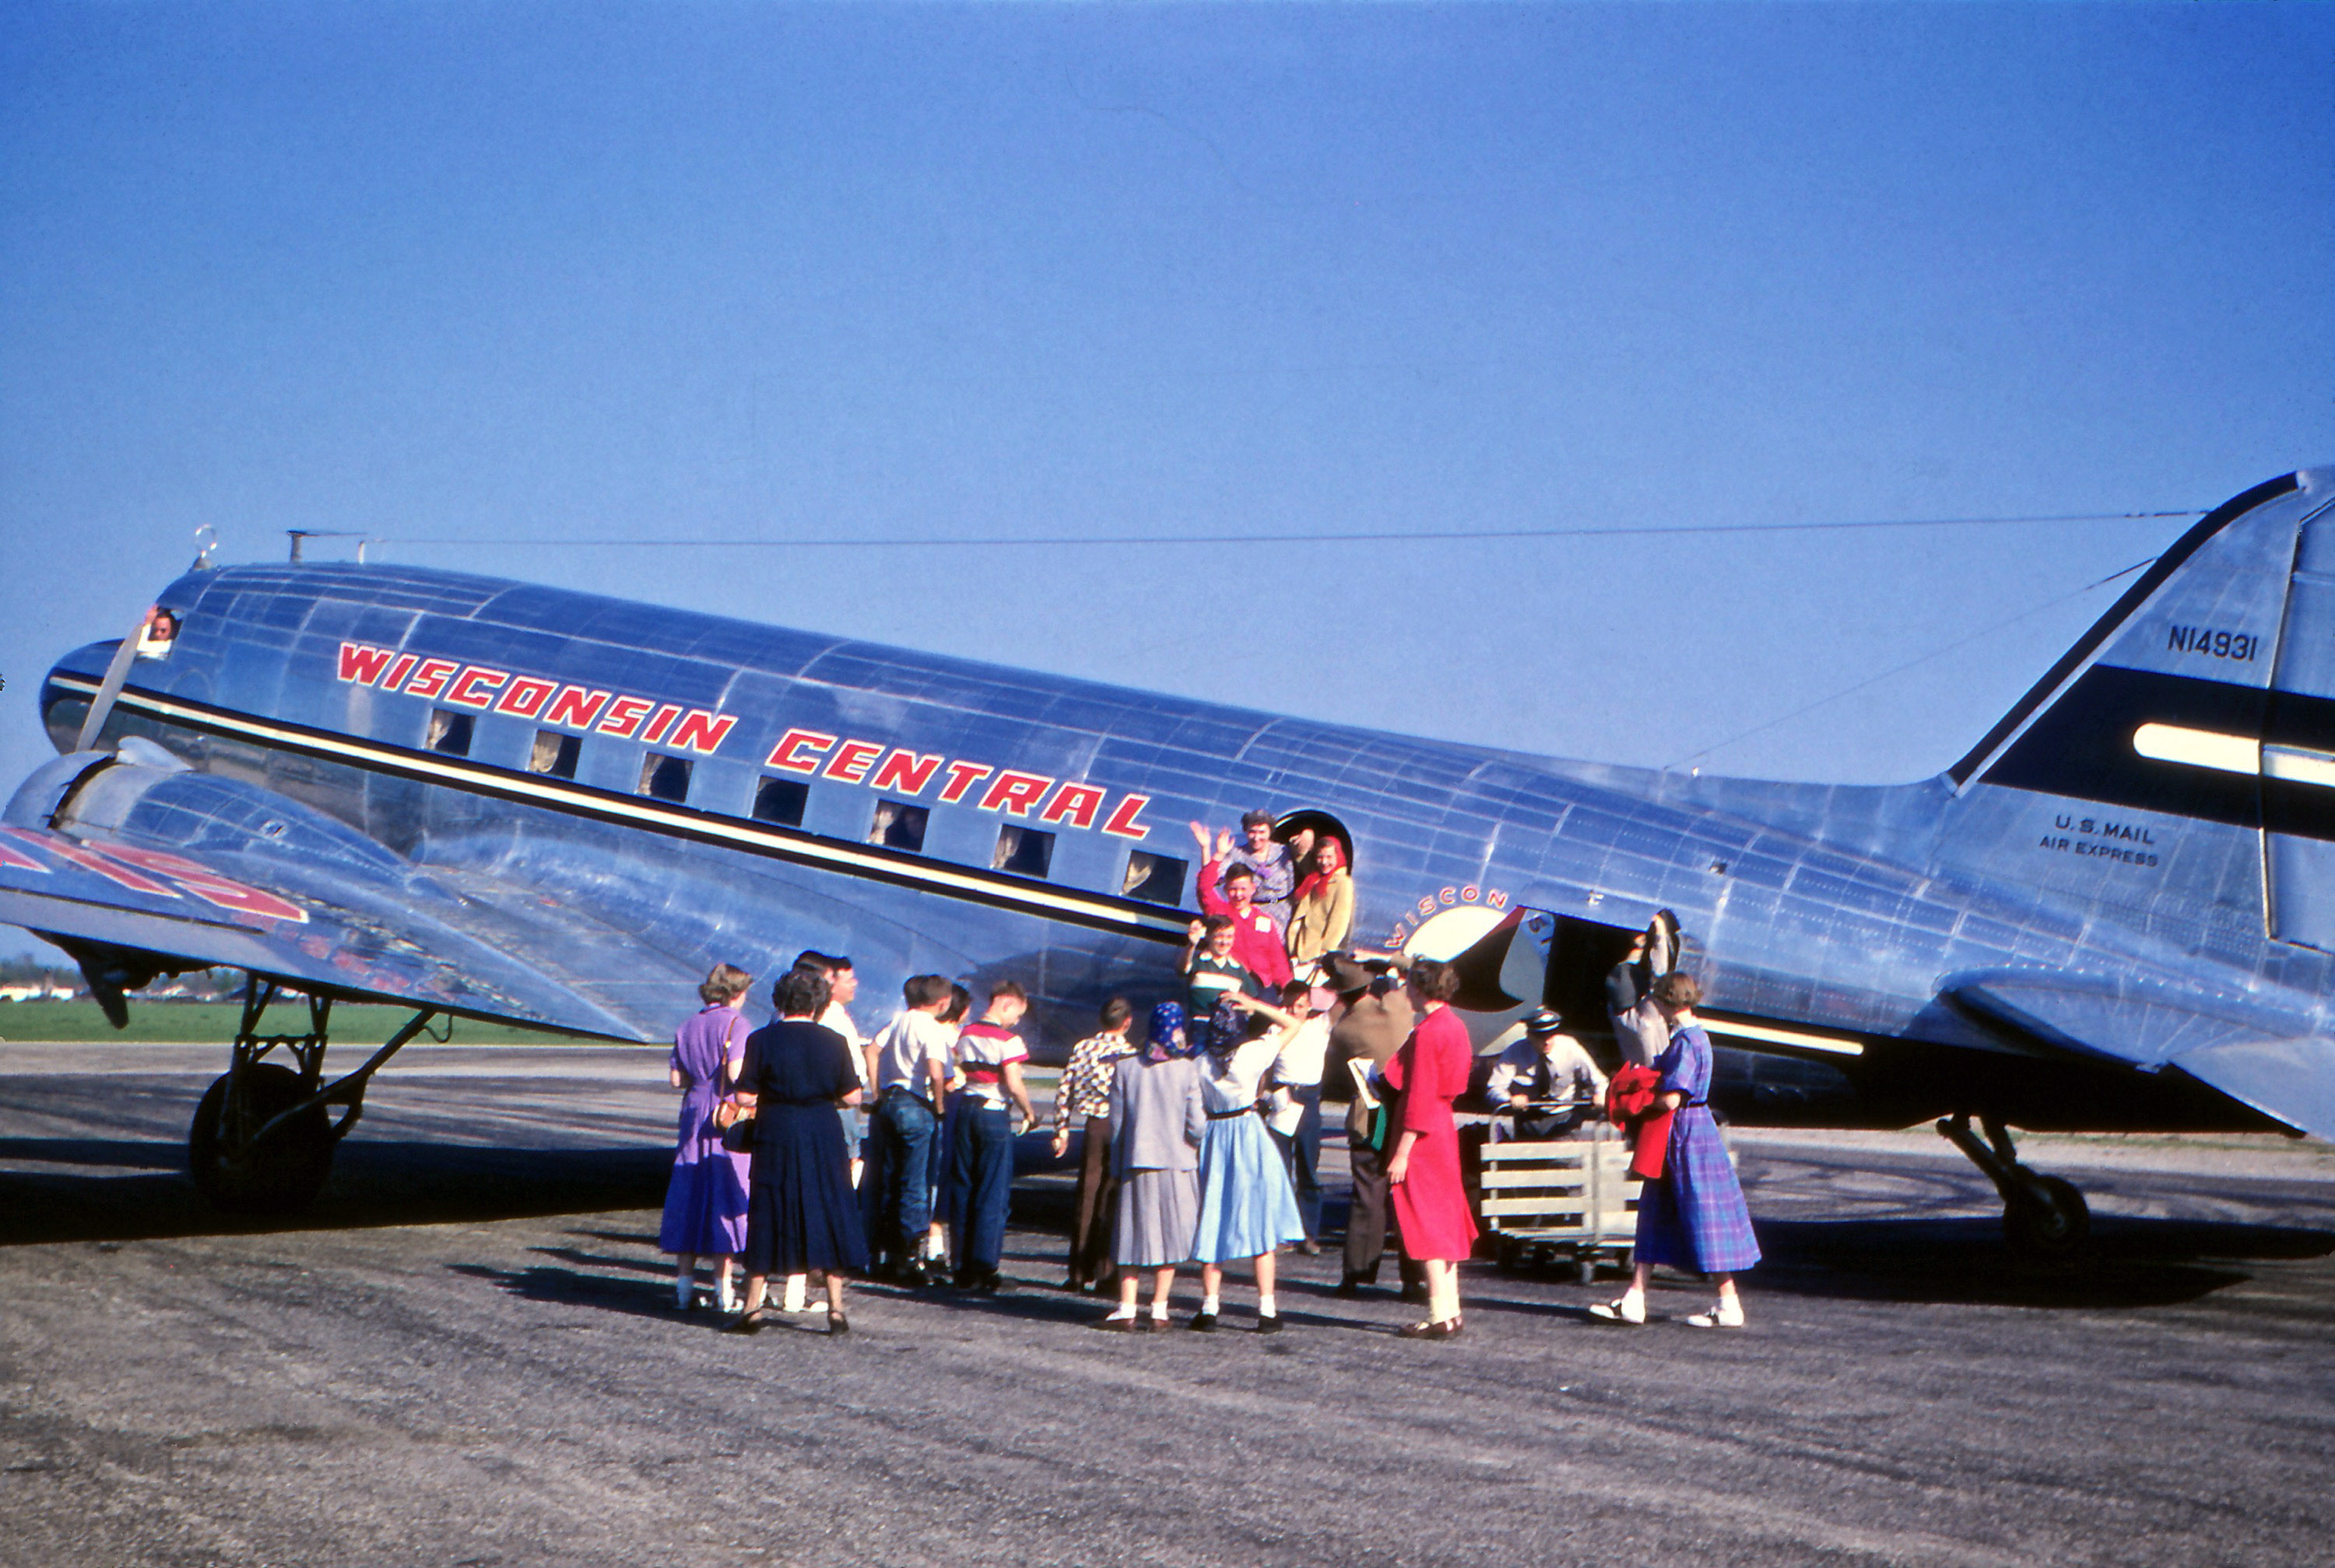 May 1952. Kodachrome by my great-uncle Herbert F. Krahn of Oshkosh, Wisconsin. I have no idea who any of the people are in this image, but I assume that someone on the plane flew into Oshkosh to visit Herbert and my great-aunt. Note that the pilot appears to be waving from the cockpit. View full size.